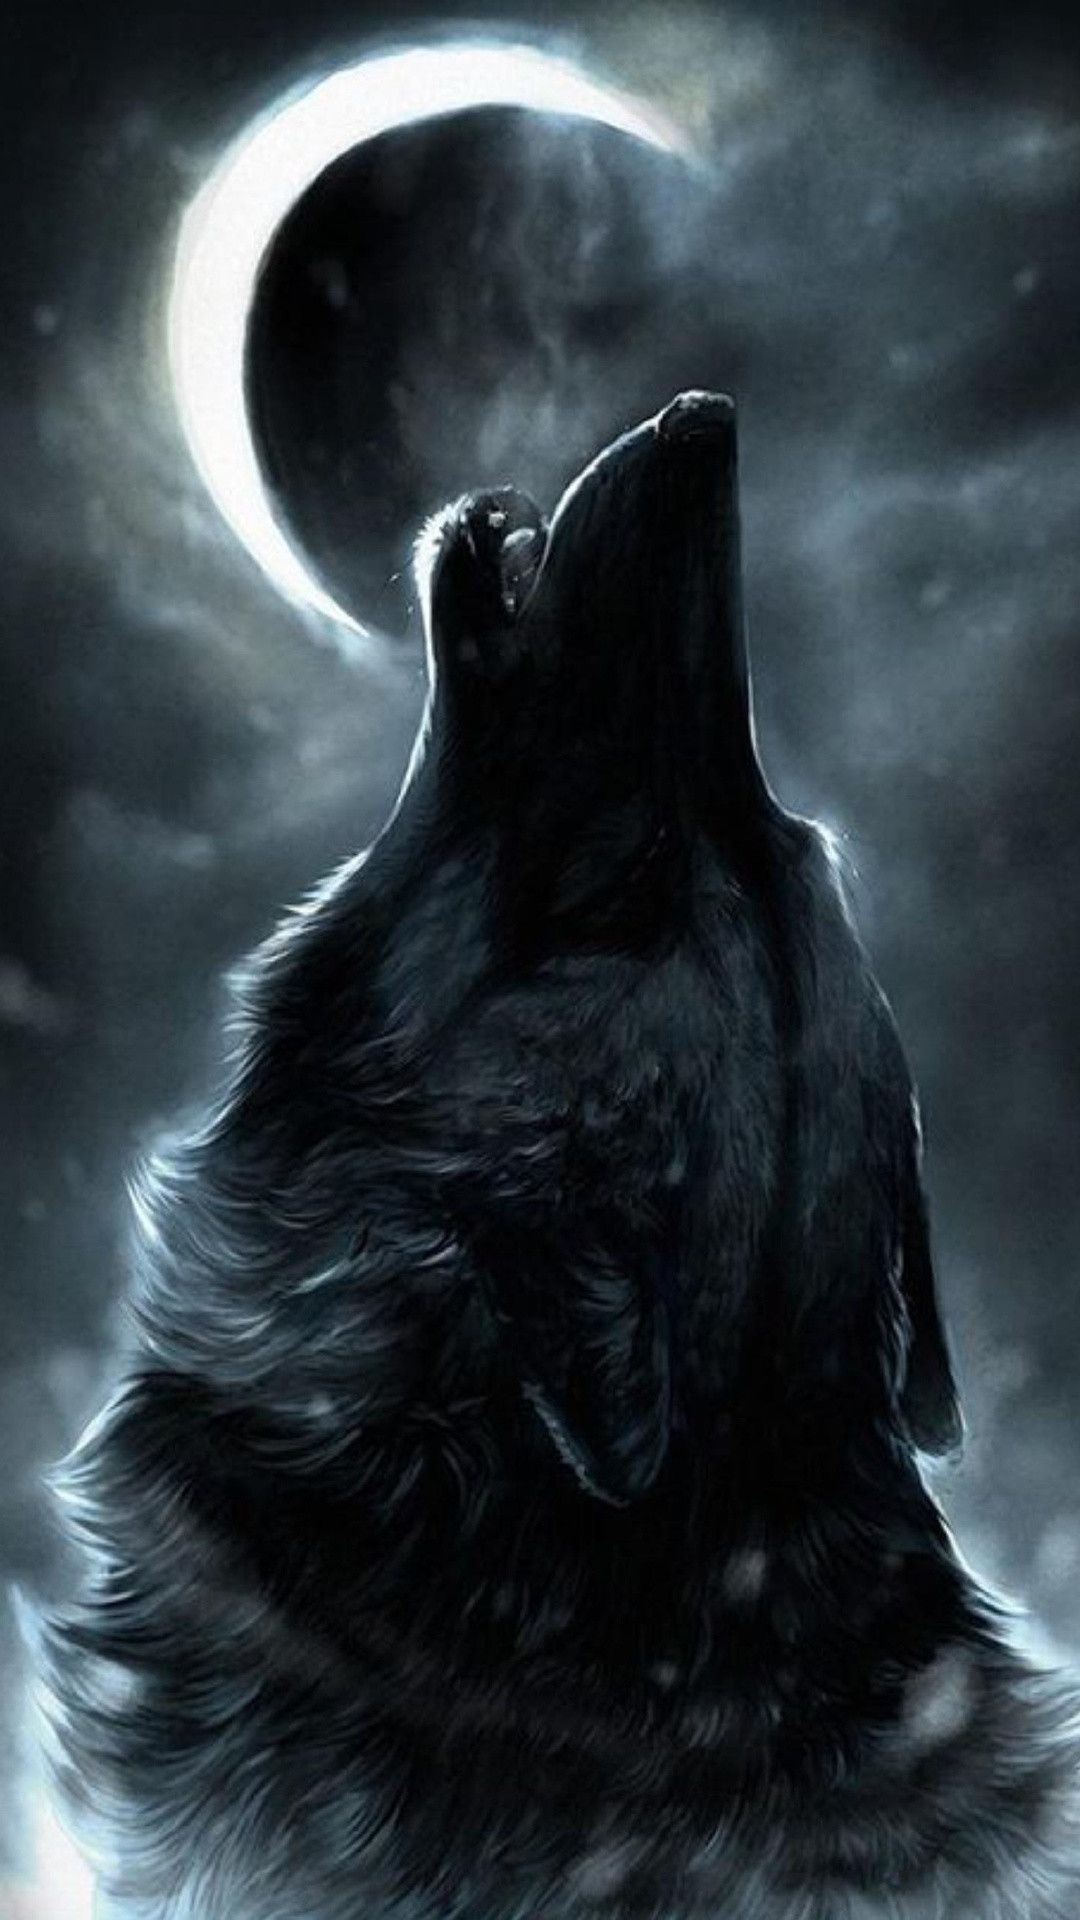 Epic Wolf Wallpaper Full HD Hupages Download iPhone Wallpaper. Wolf wallpaper, Wolf spirit, Wolf artwork